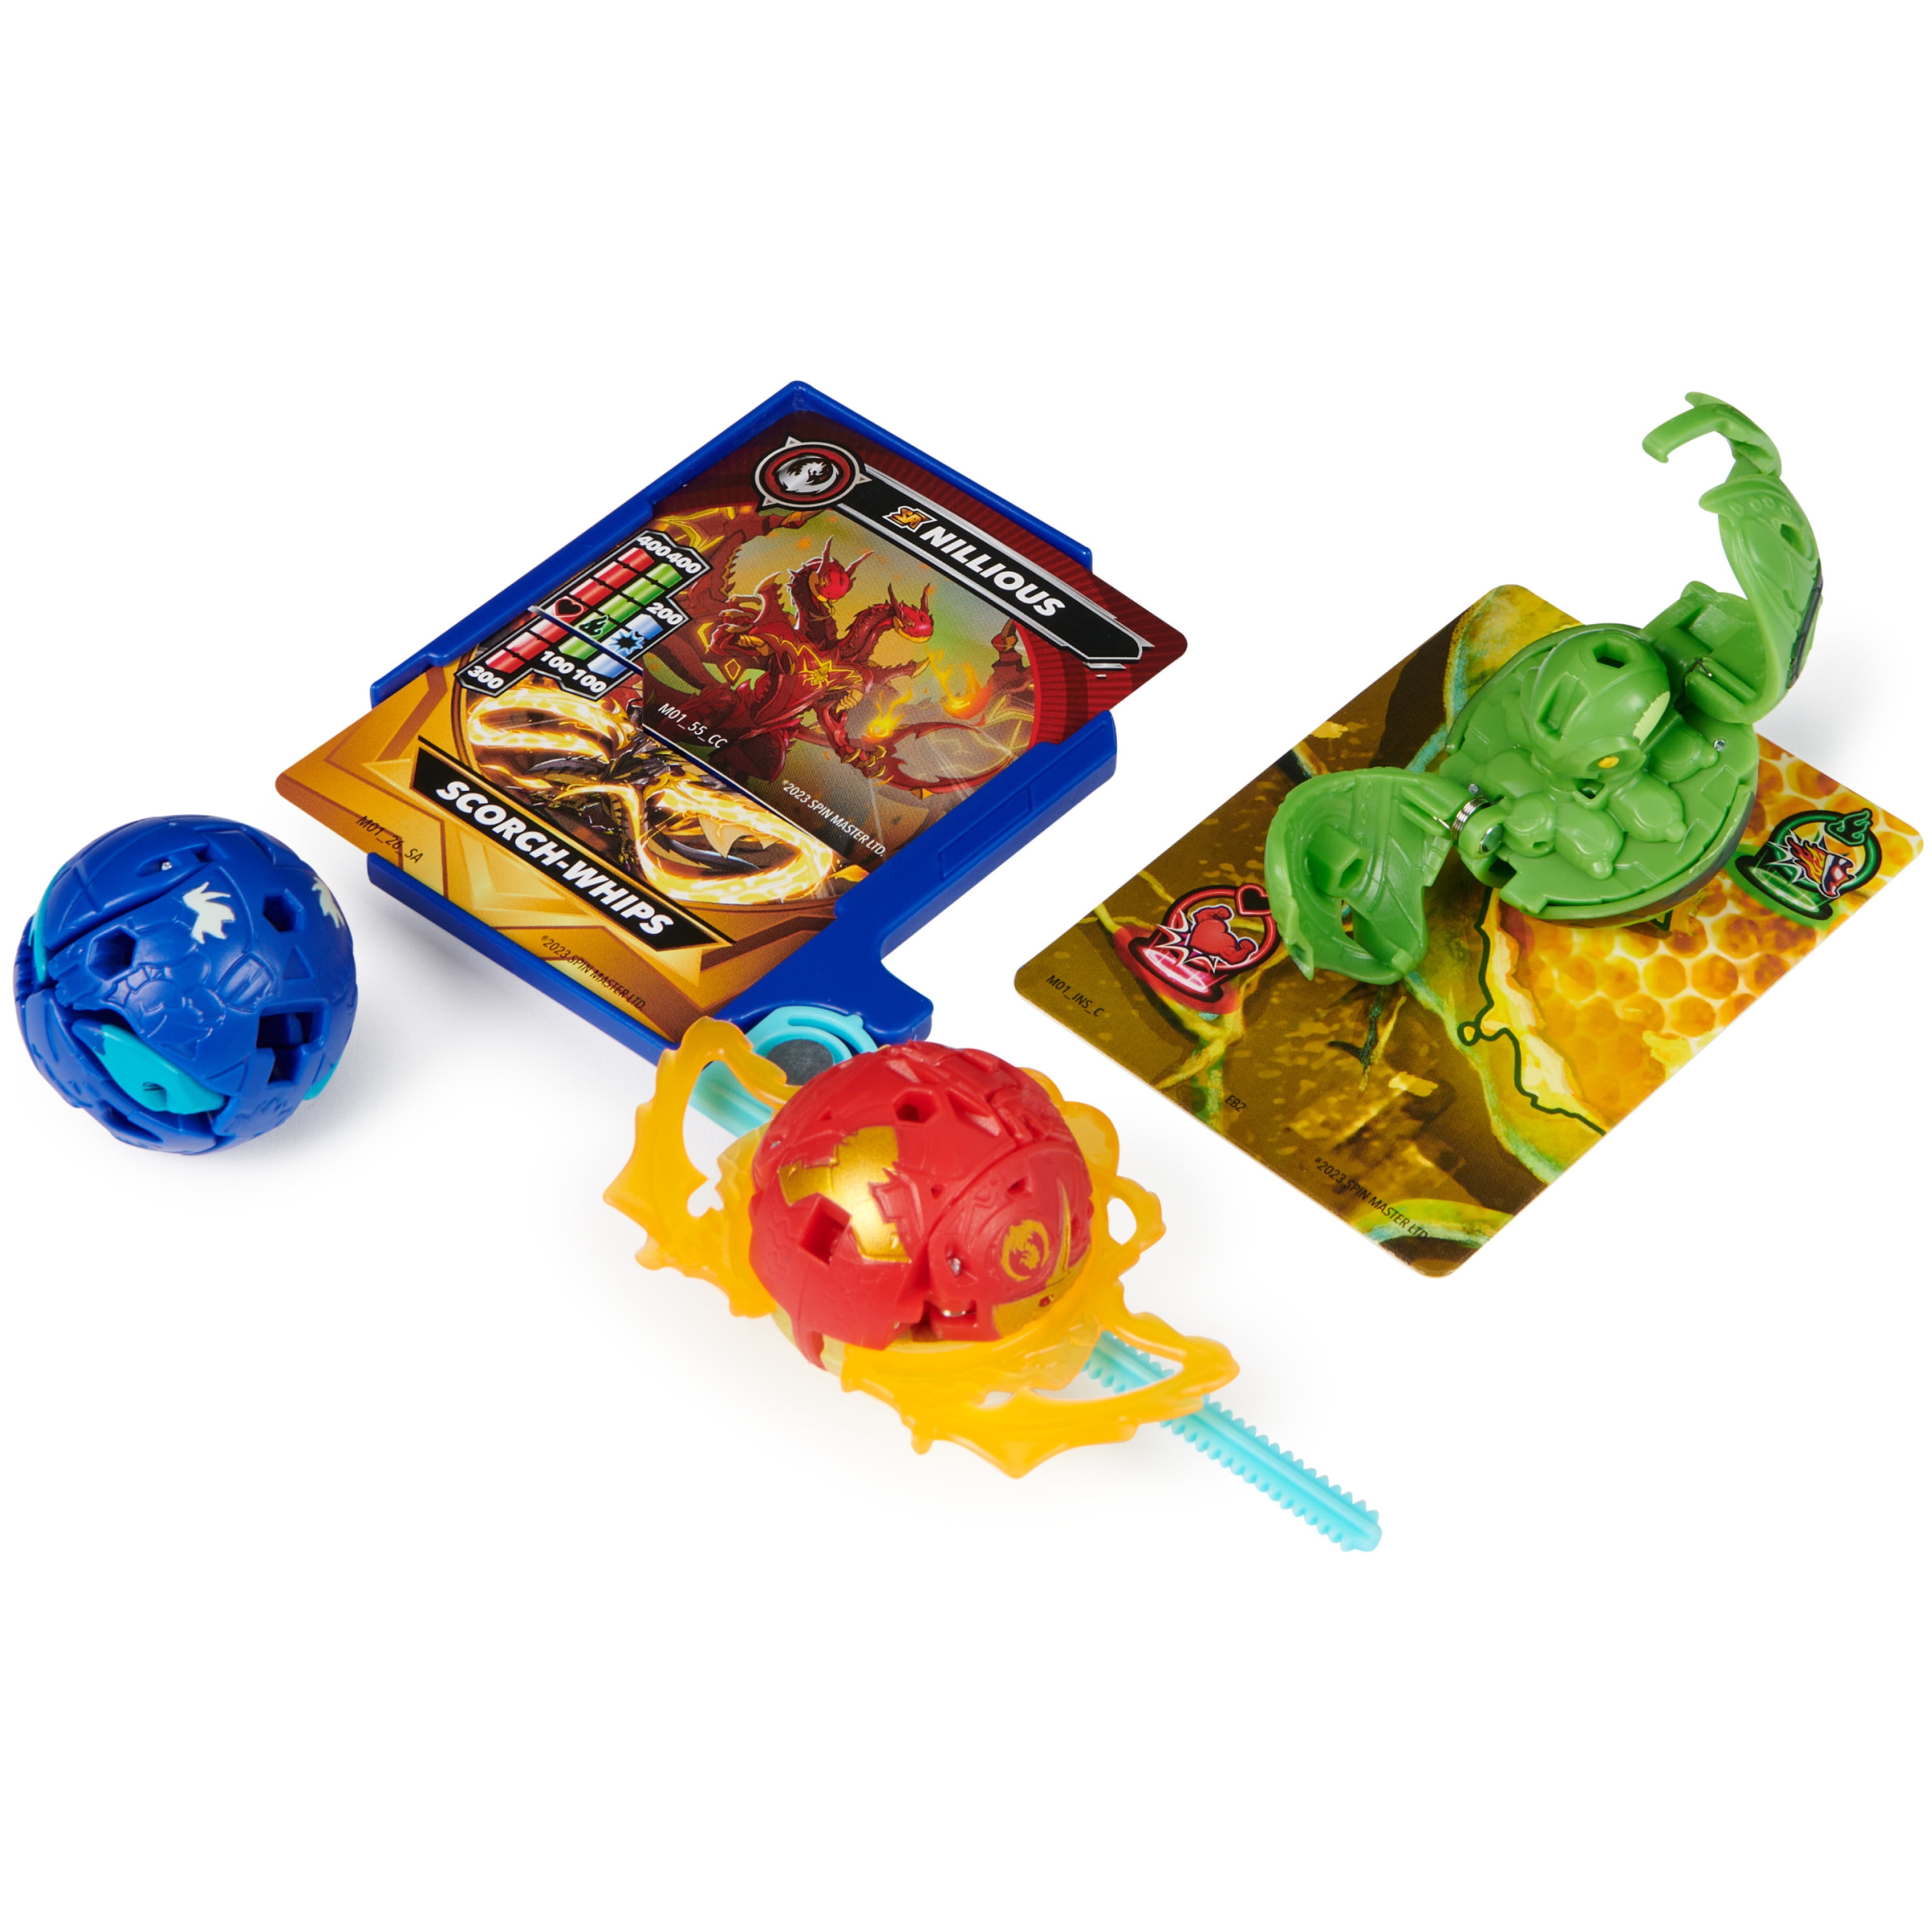 Bakugan 2023 Special Attack Nillious, Mantid, Bruiser, Octogan Trox  5-Figure Battle Pack Includes Online Roblox Game Code Spin Master - ToyWiz